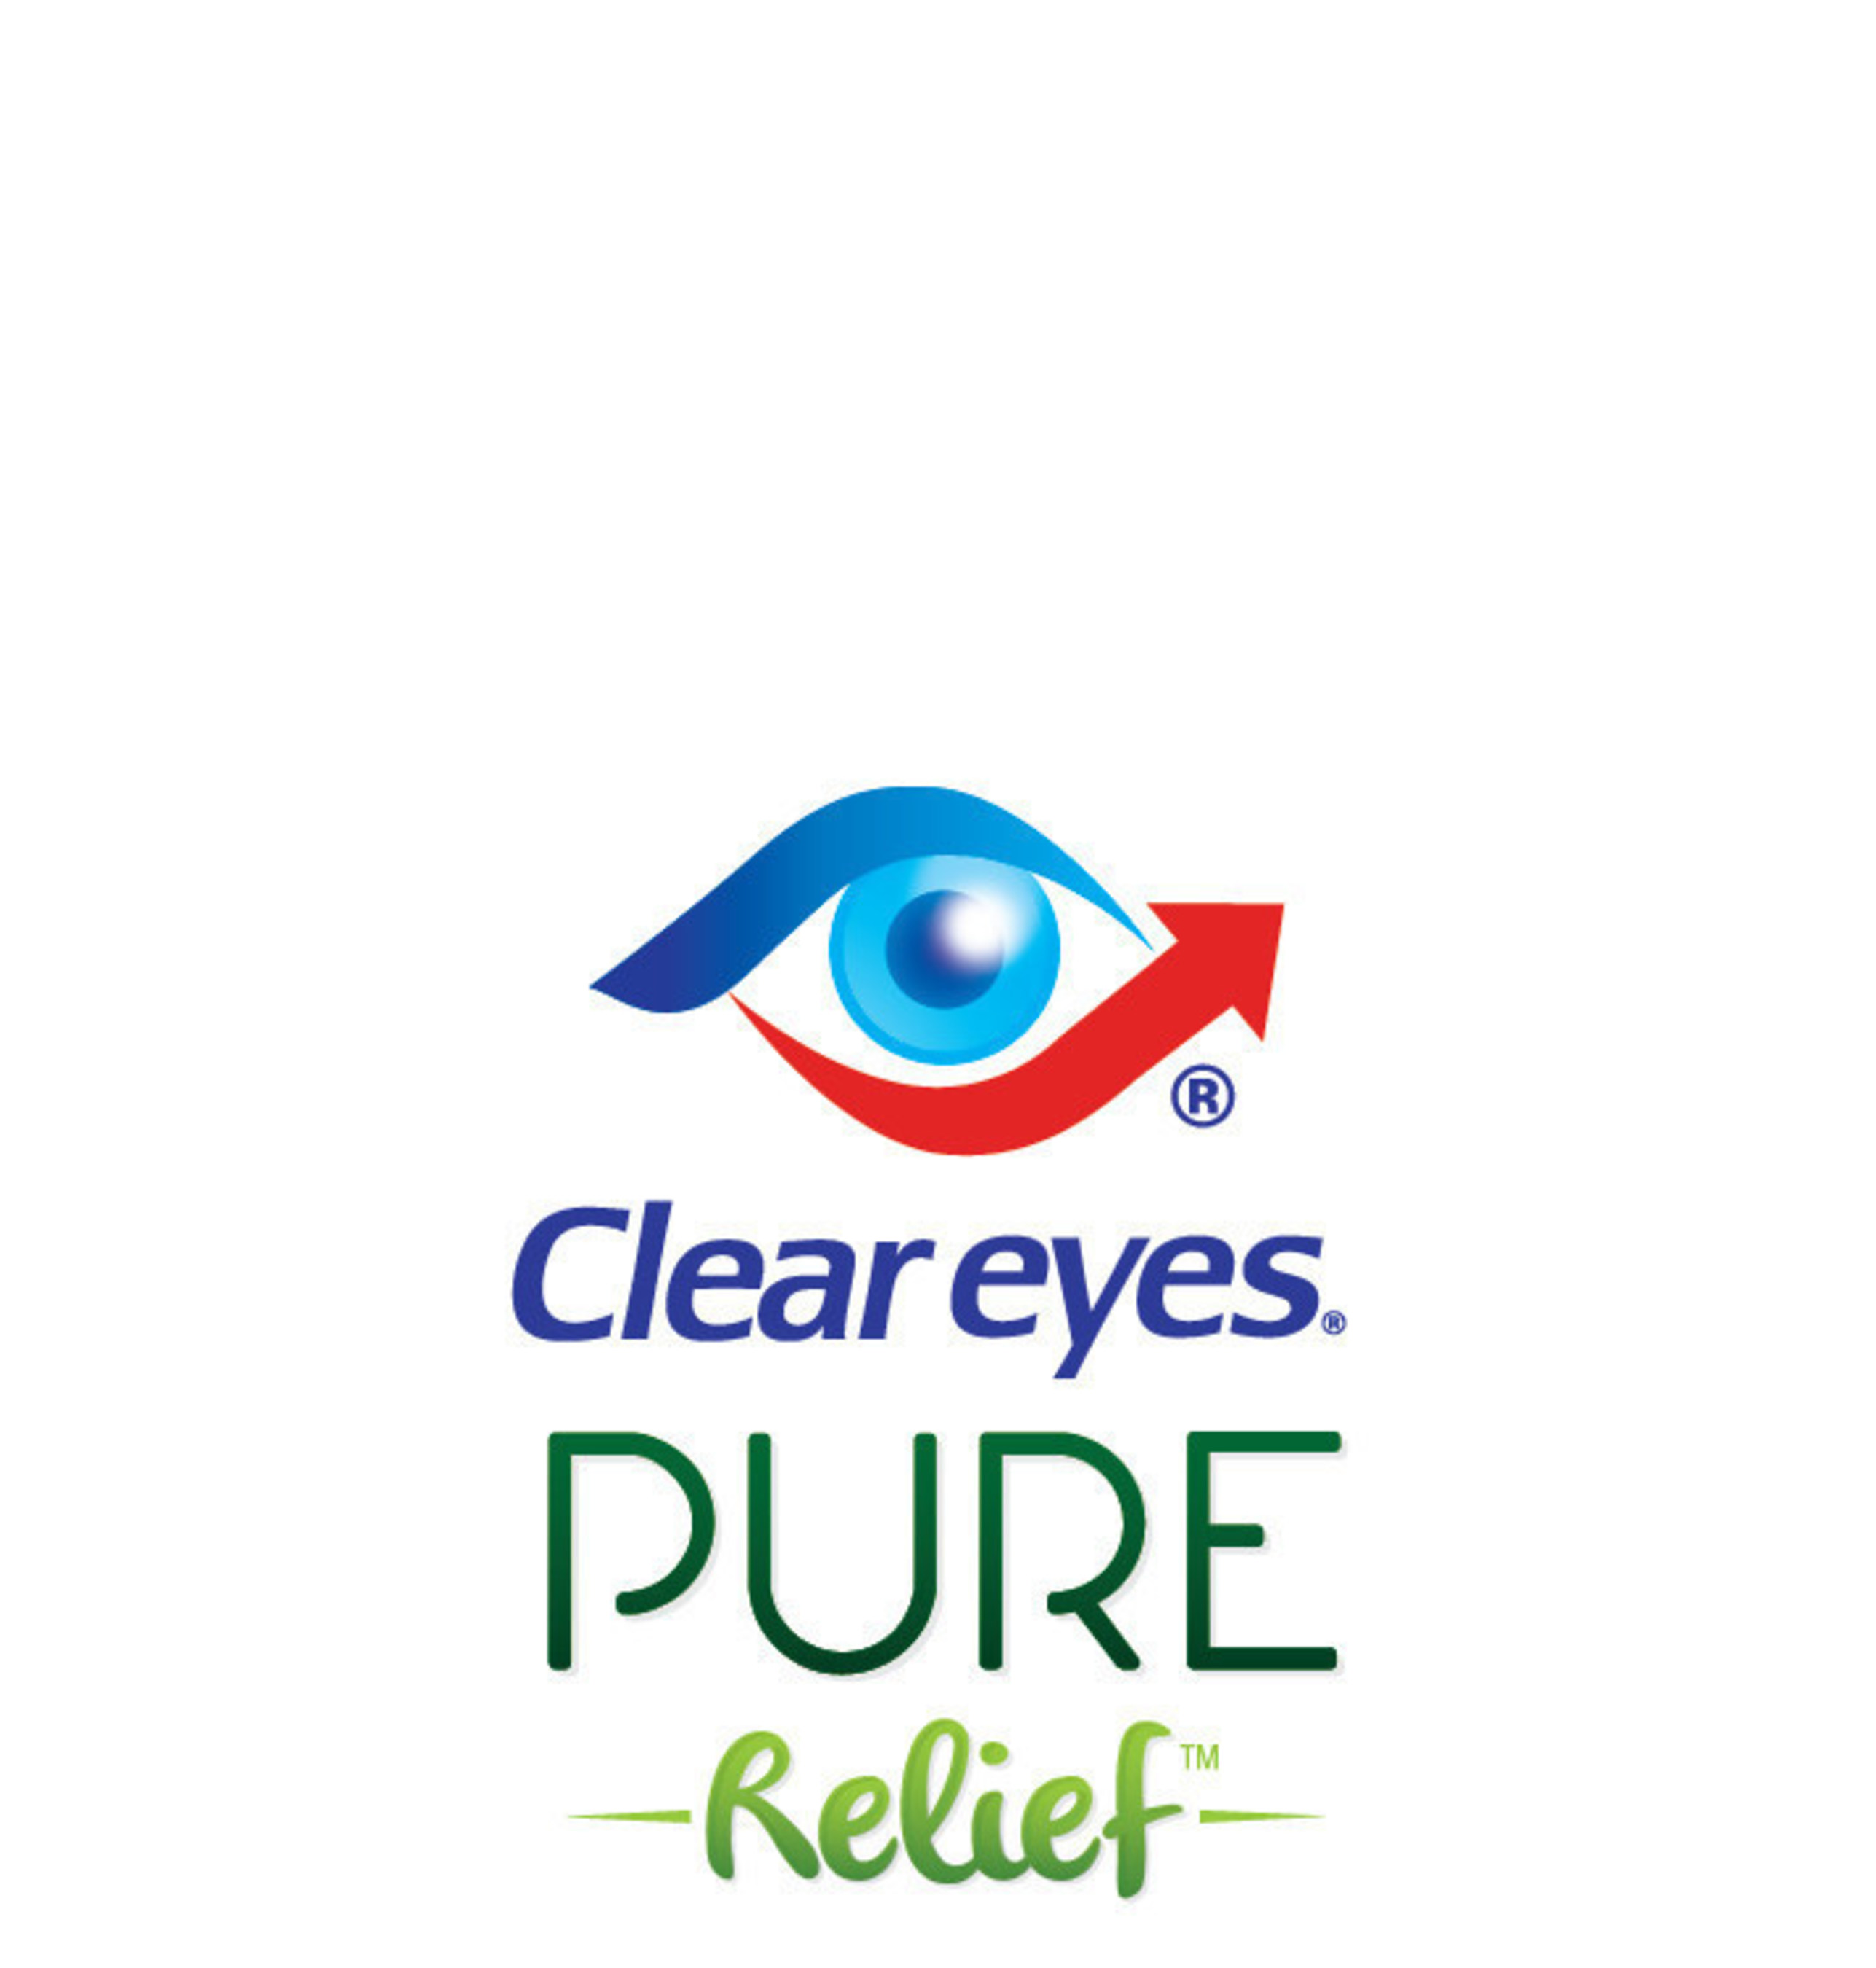 Clear Eyes(R) Pure Relief(TM), the newest innovation from Clear Eyes(R)